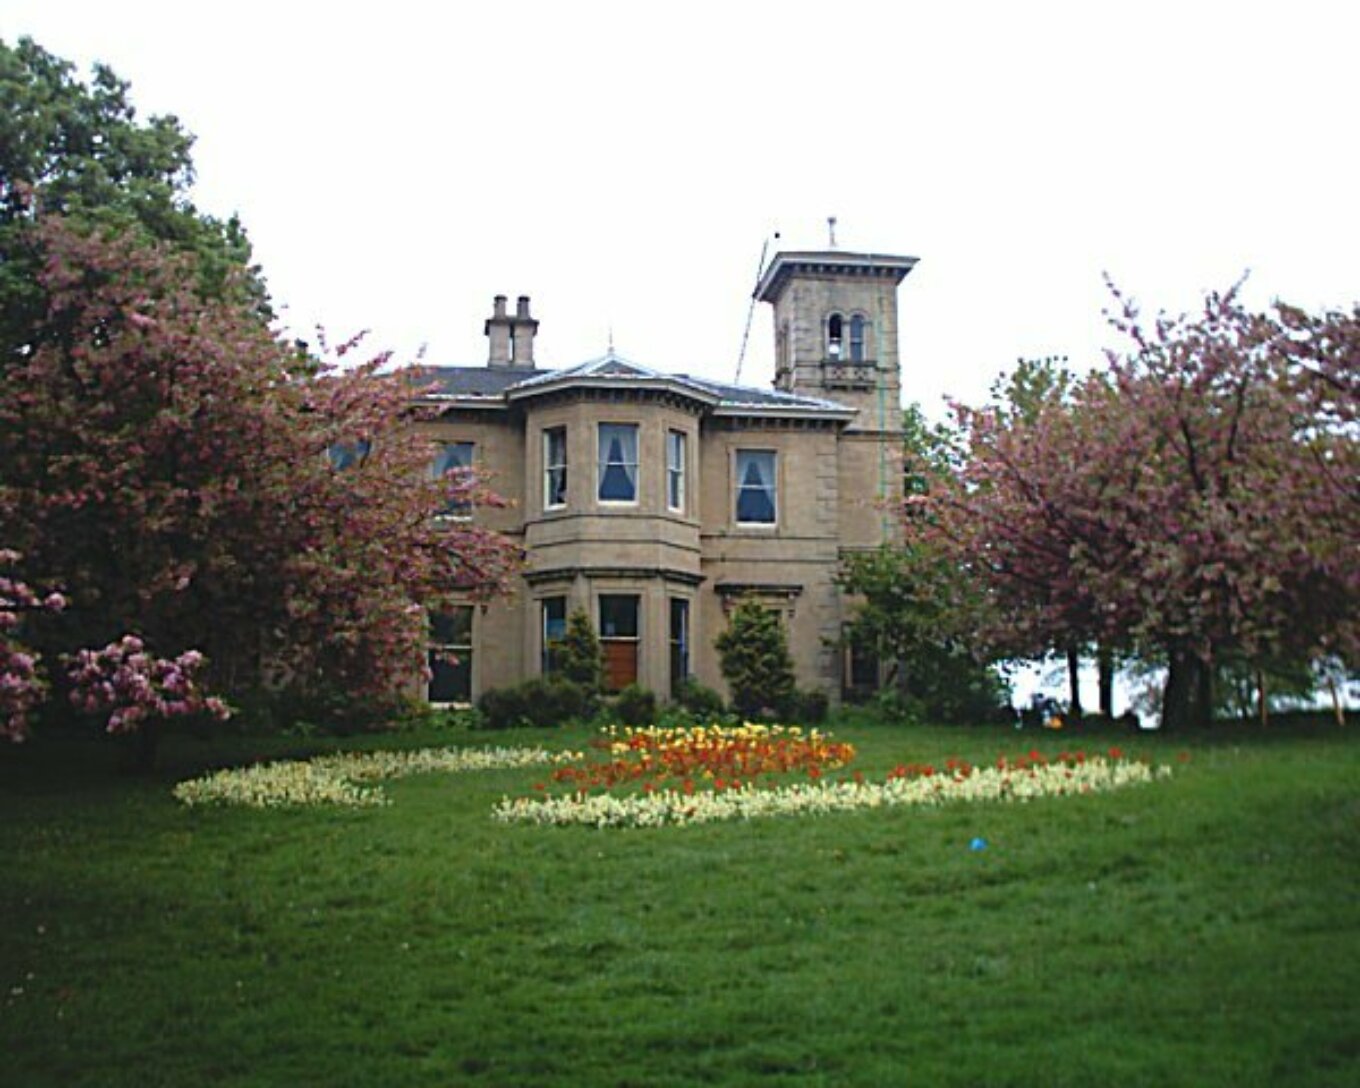 A large house amid trees and behind a neat lawn.